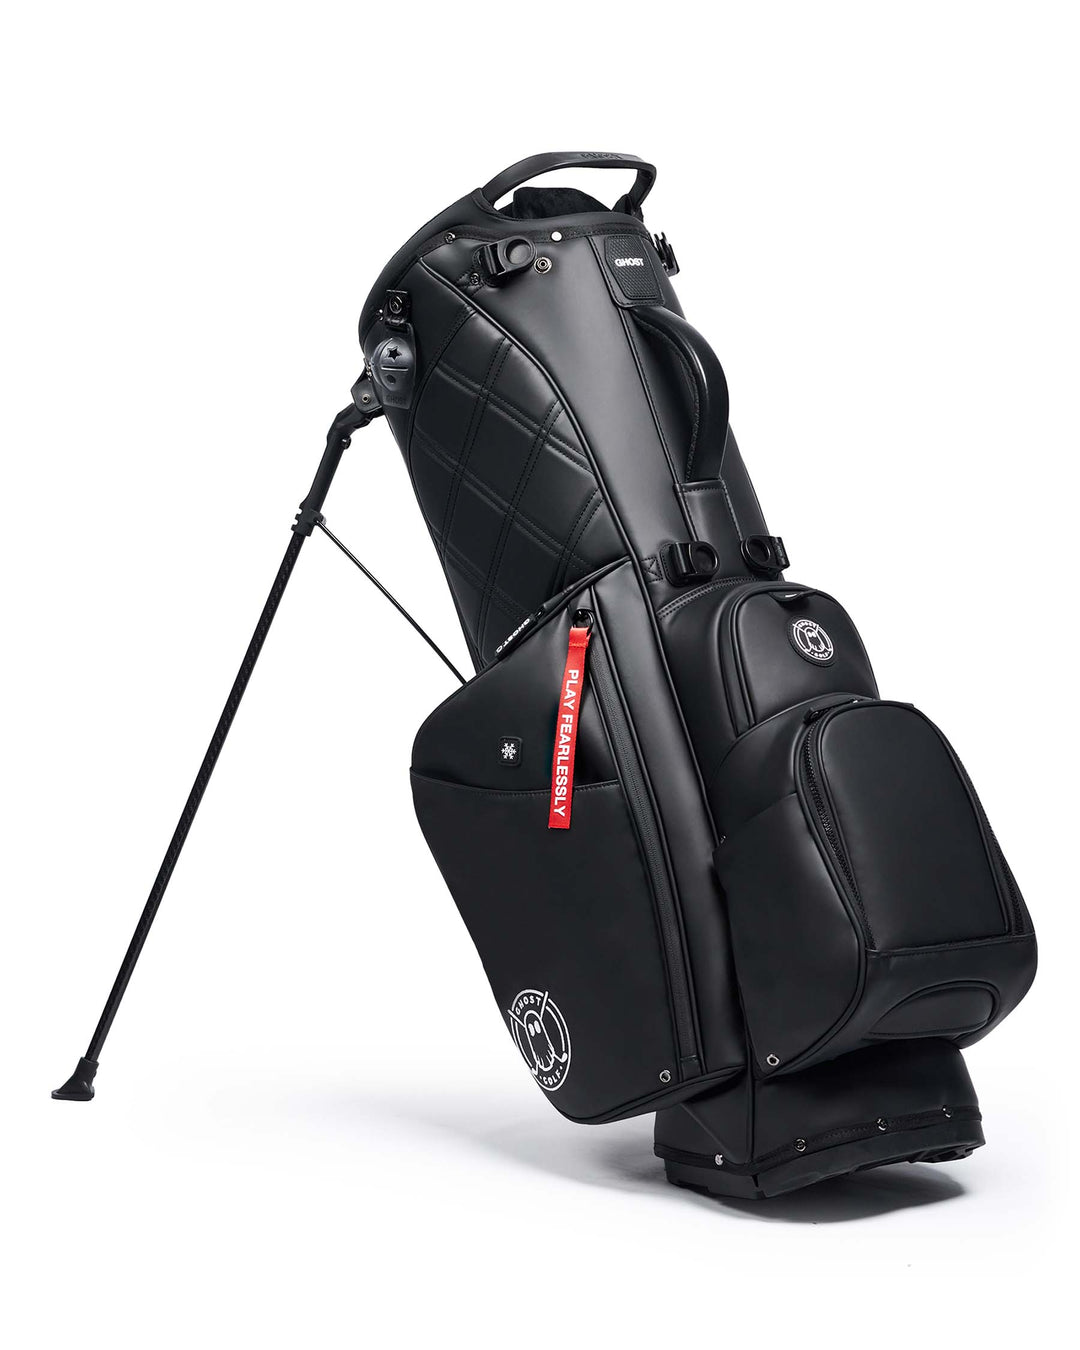 Ghost Golf KATANA Black Leather Golf Bag with Red Tags